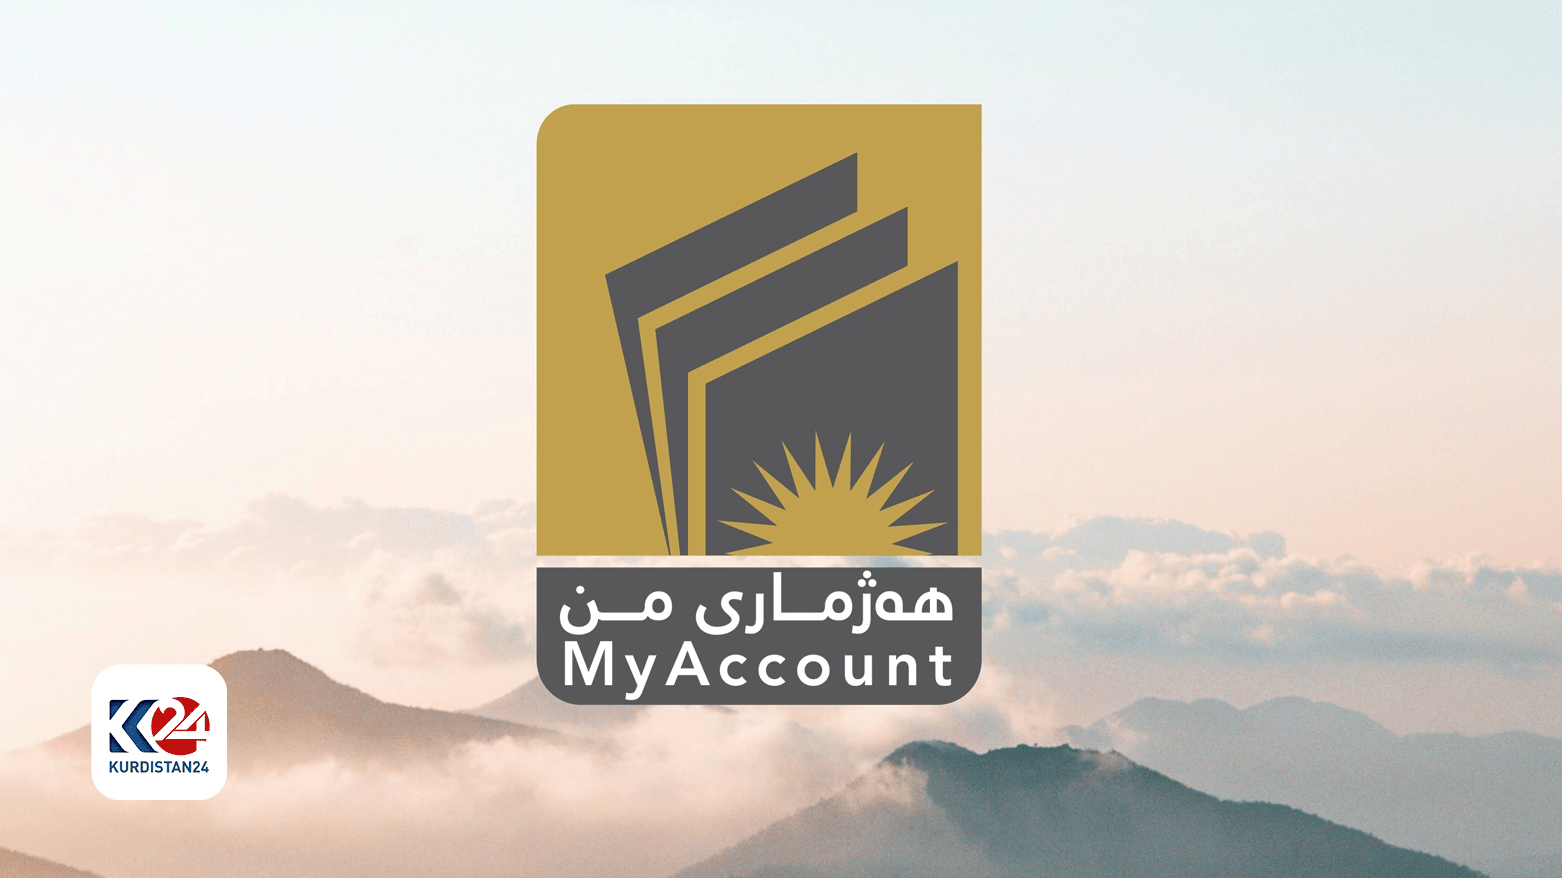 KRG announces latest statistics for the MyAccount project